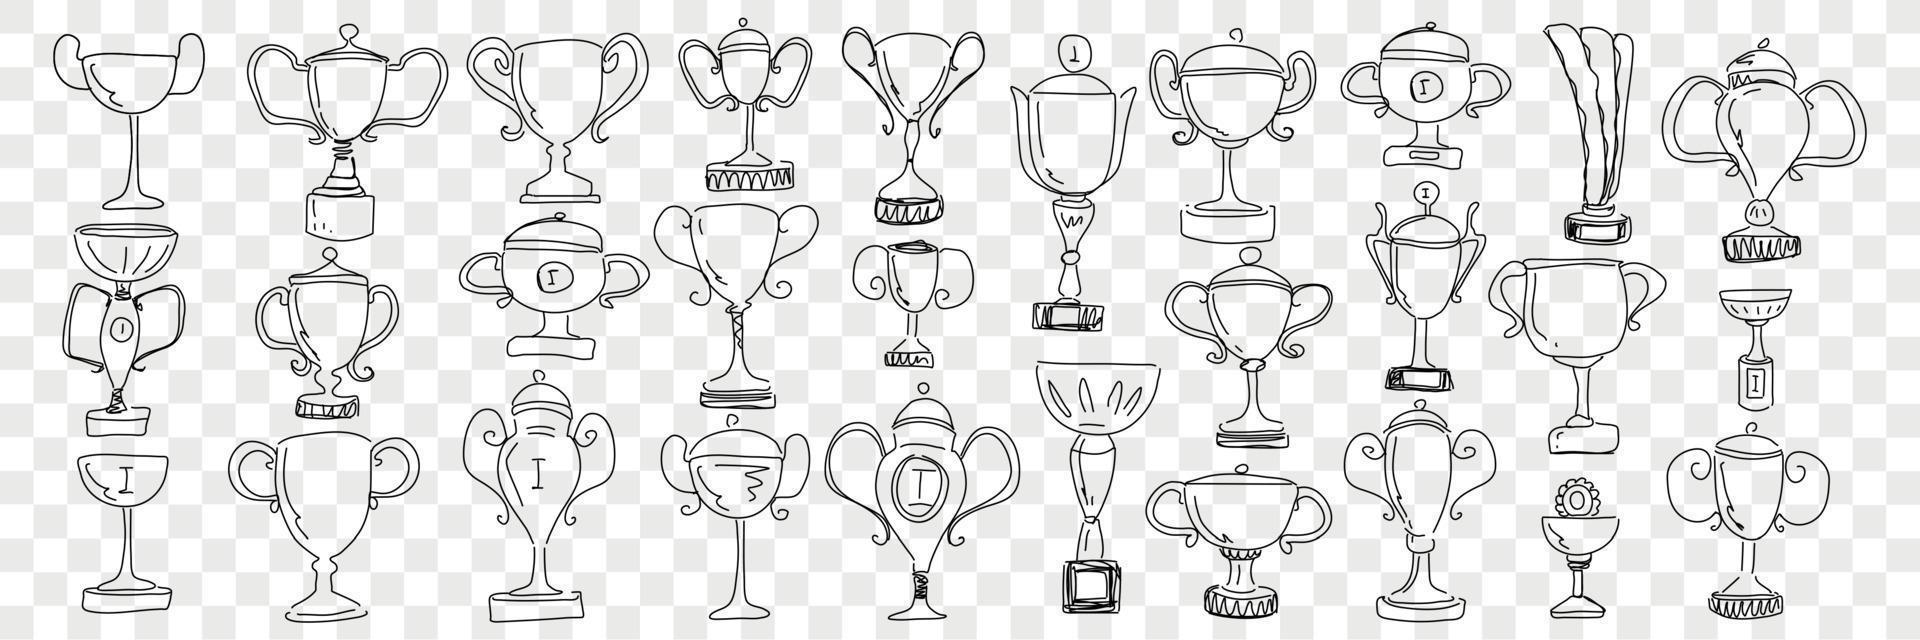 Winners cups and trophies doodle set. Collection of hand drawn golden champion cups trophy for first prize and win in championship or sport competition isolated on transparent background vector